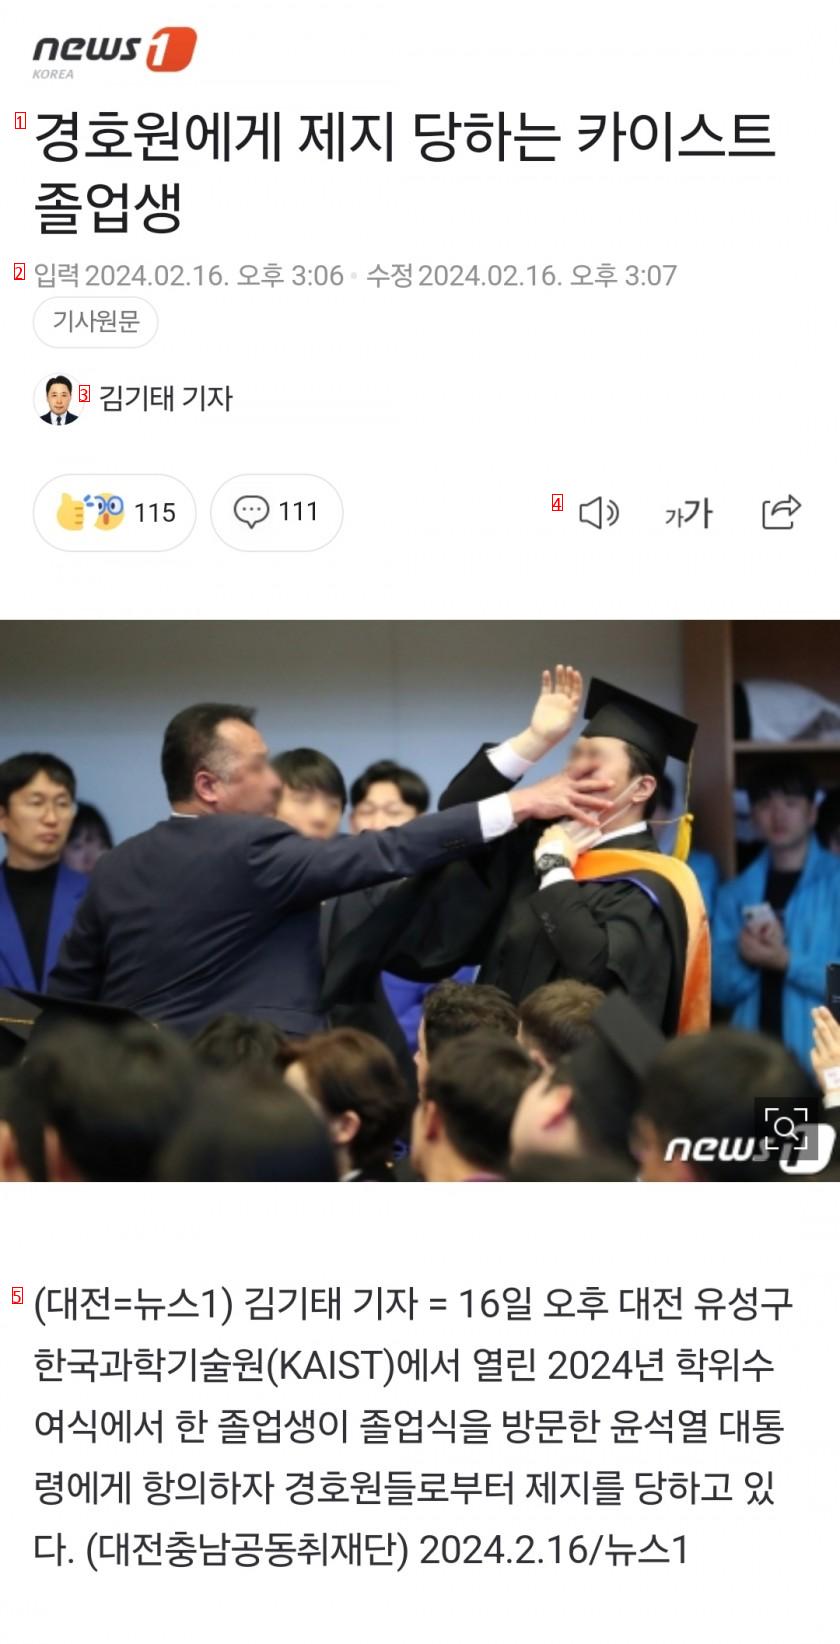 KAIST graduate being restrained by bodyguards